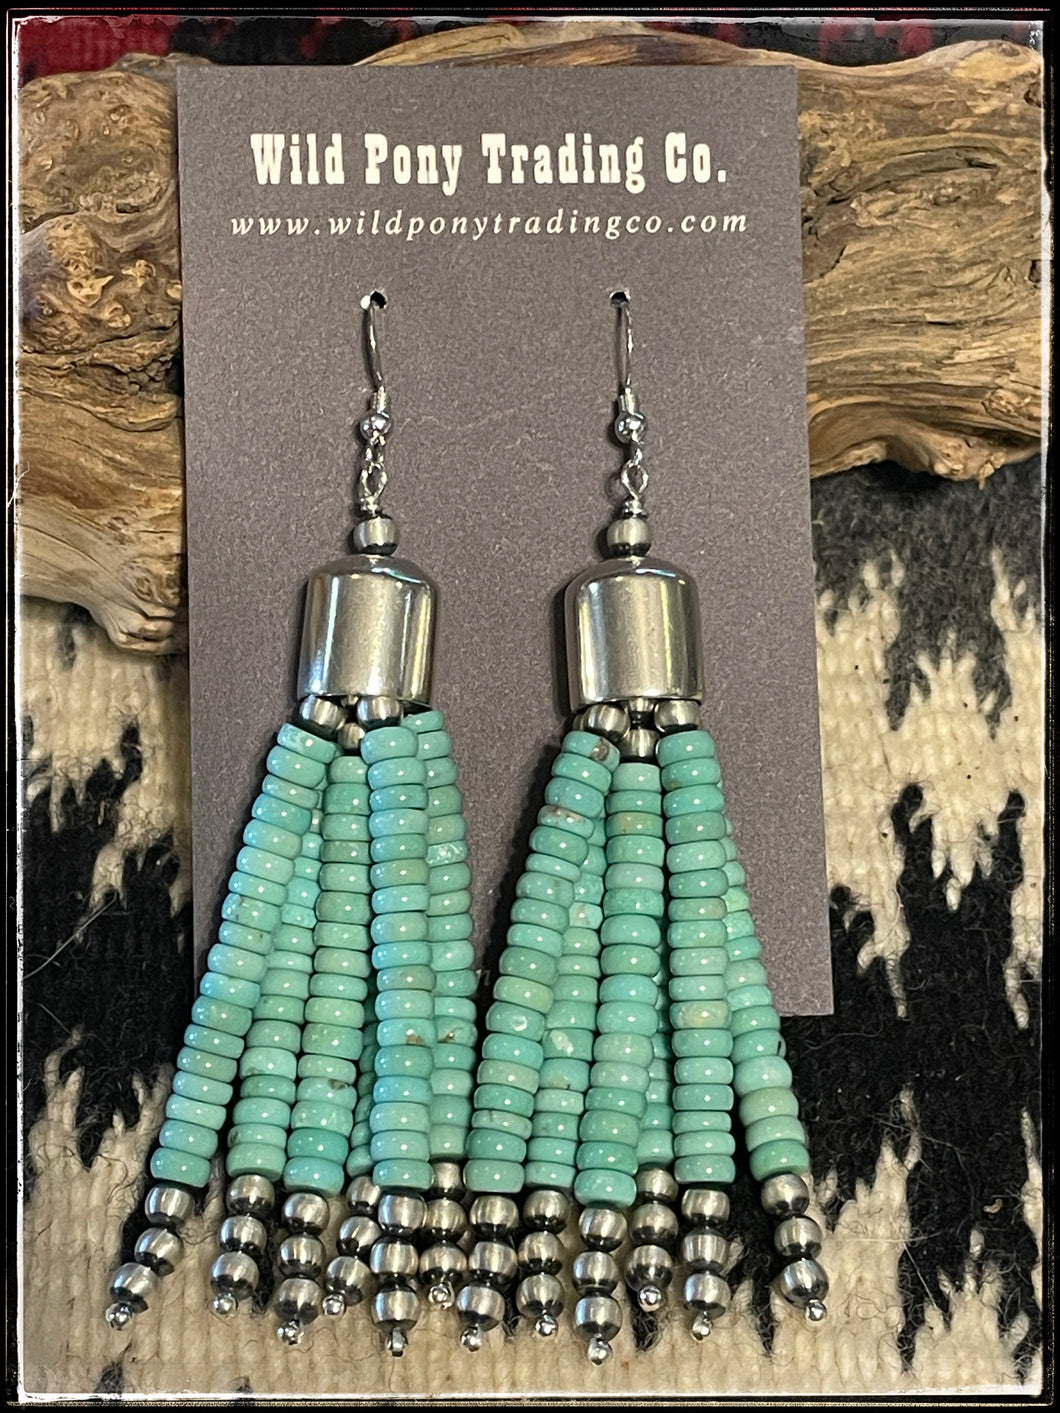 6 strand tassel earrings made with 3mm sterling silver beads and 5mm turquoise disk beads